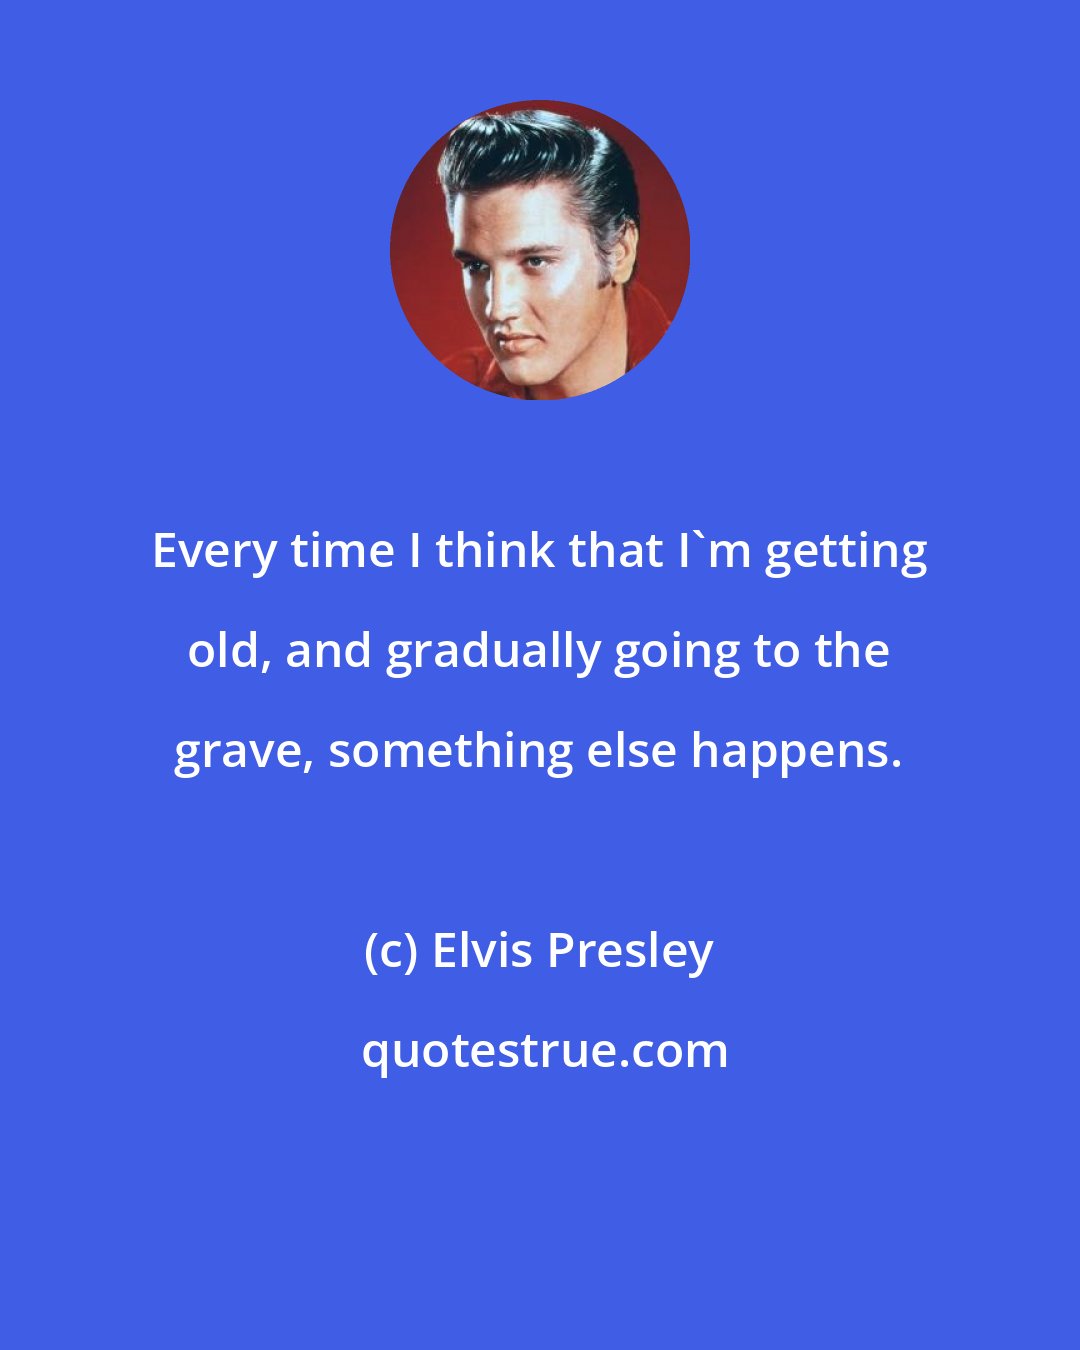 Elvis Presley: Every time I think that I'm getting old, and gradually going to the grave, something else happens.